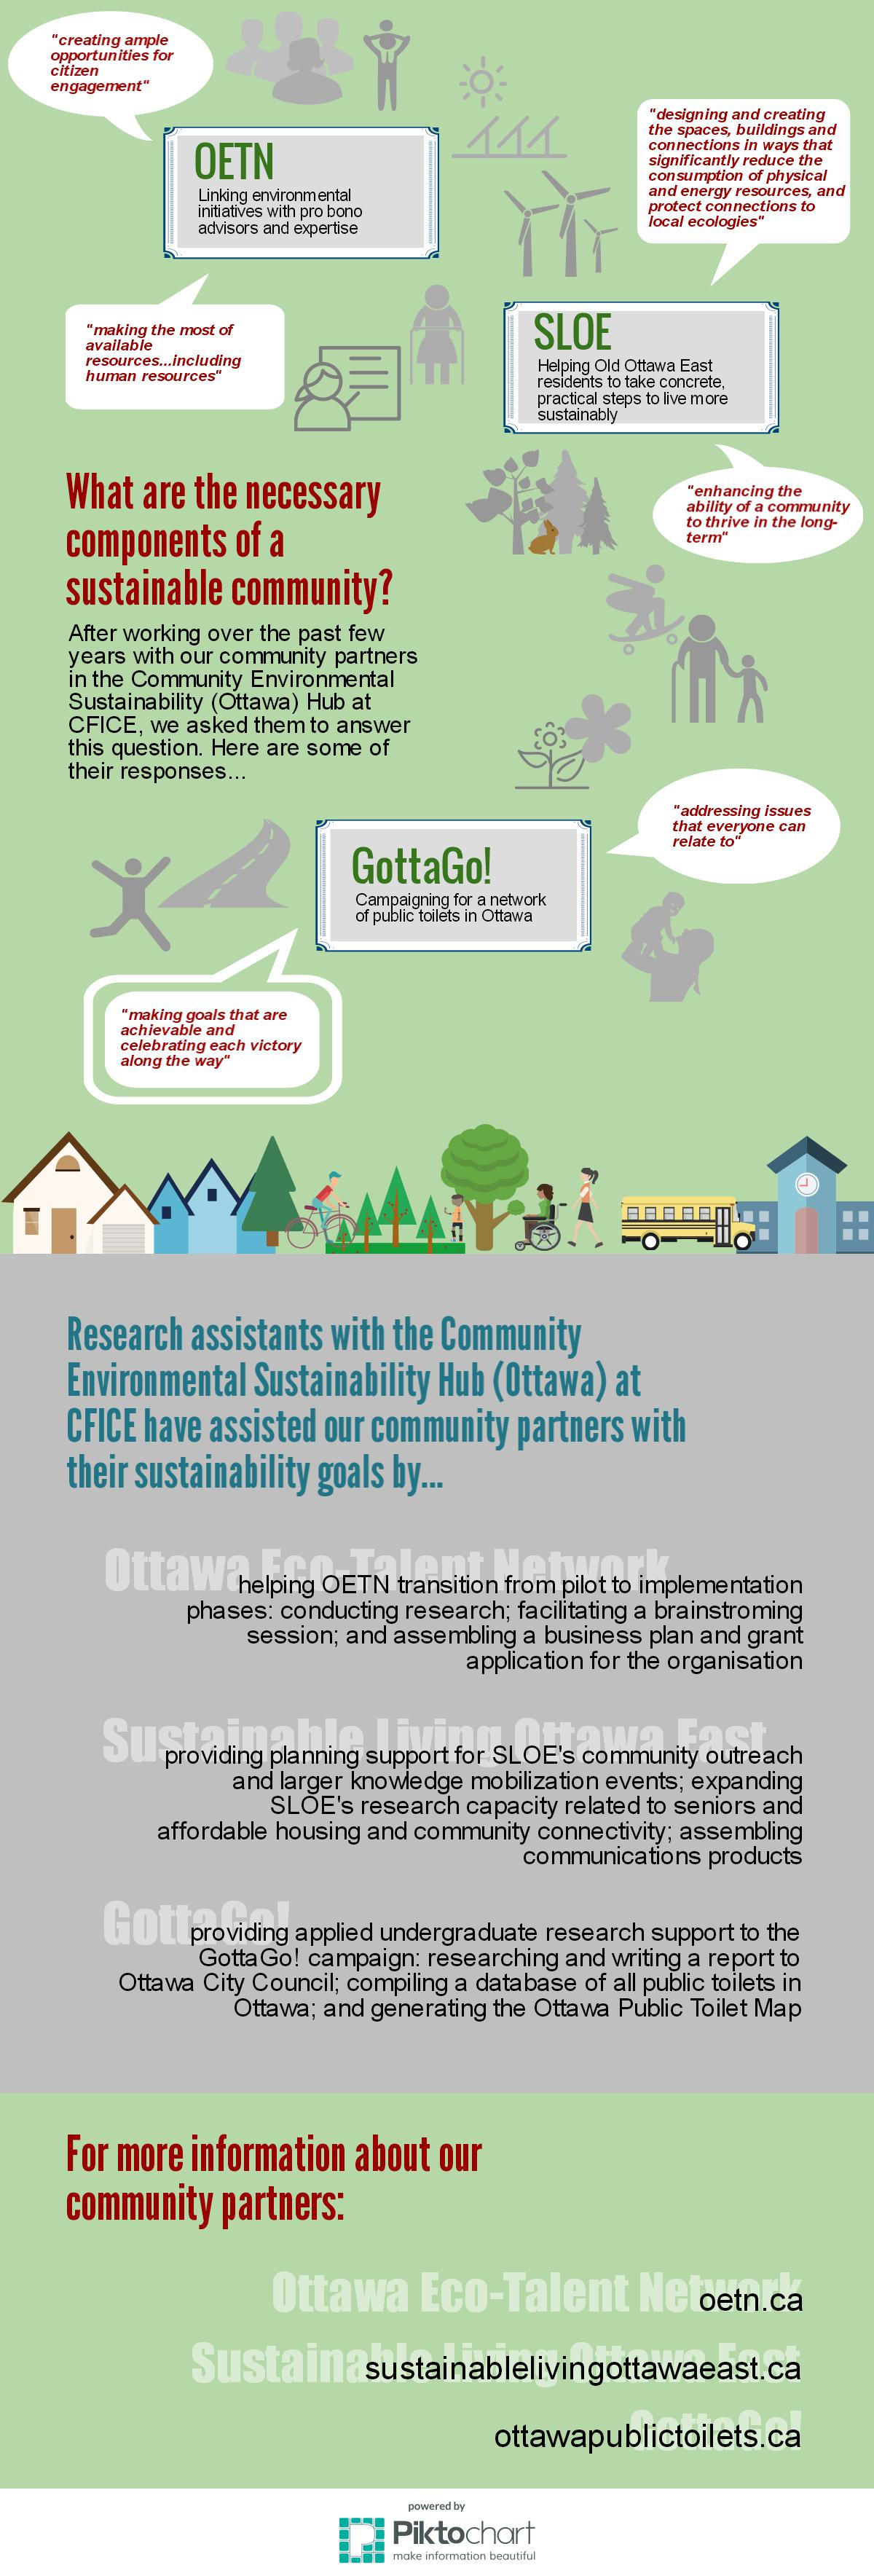 An infographic depicting how the Community Environmental Sustainability (Ottawa) hub partners view community sustainability and CFICE's contributions to their organizations.